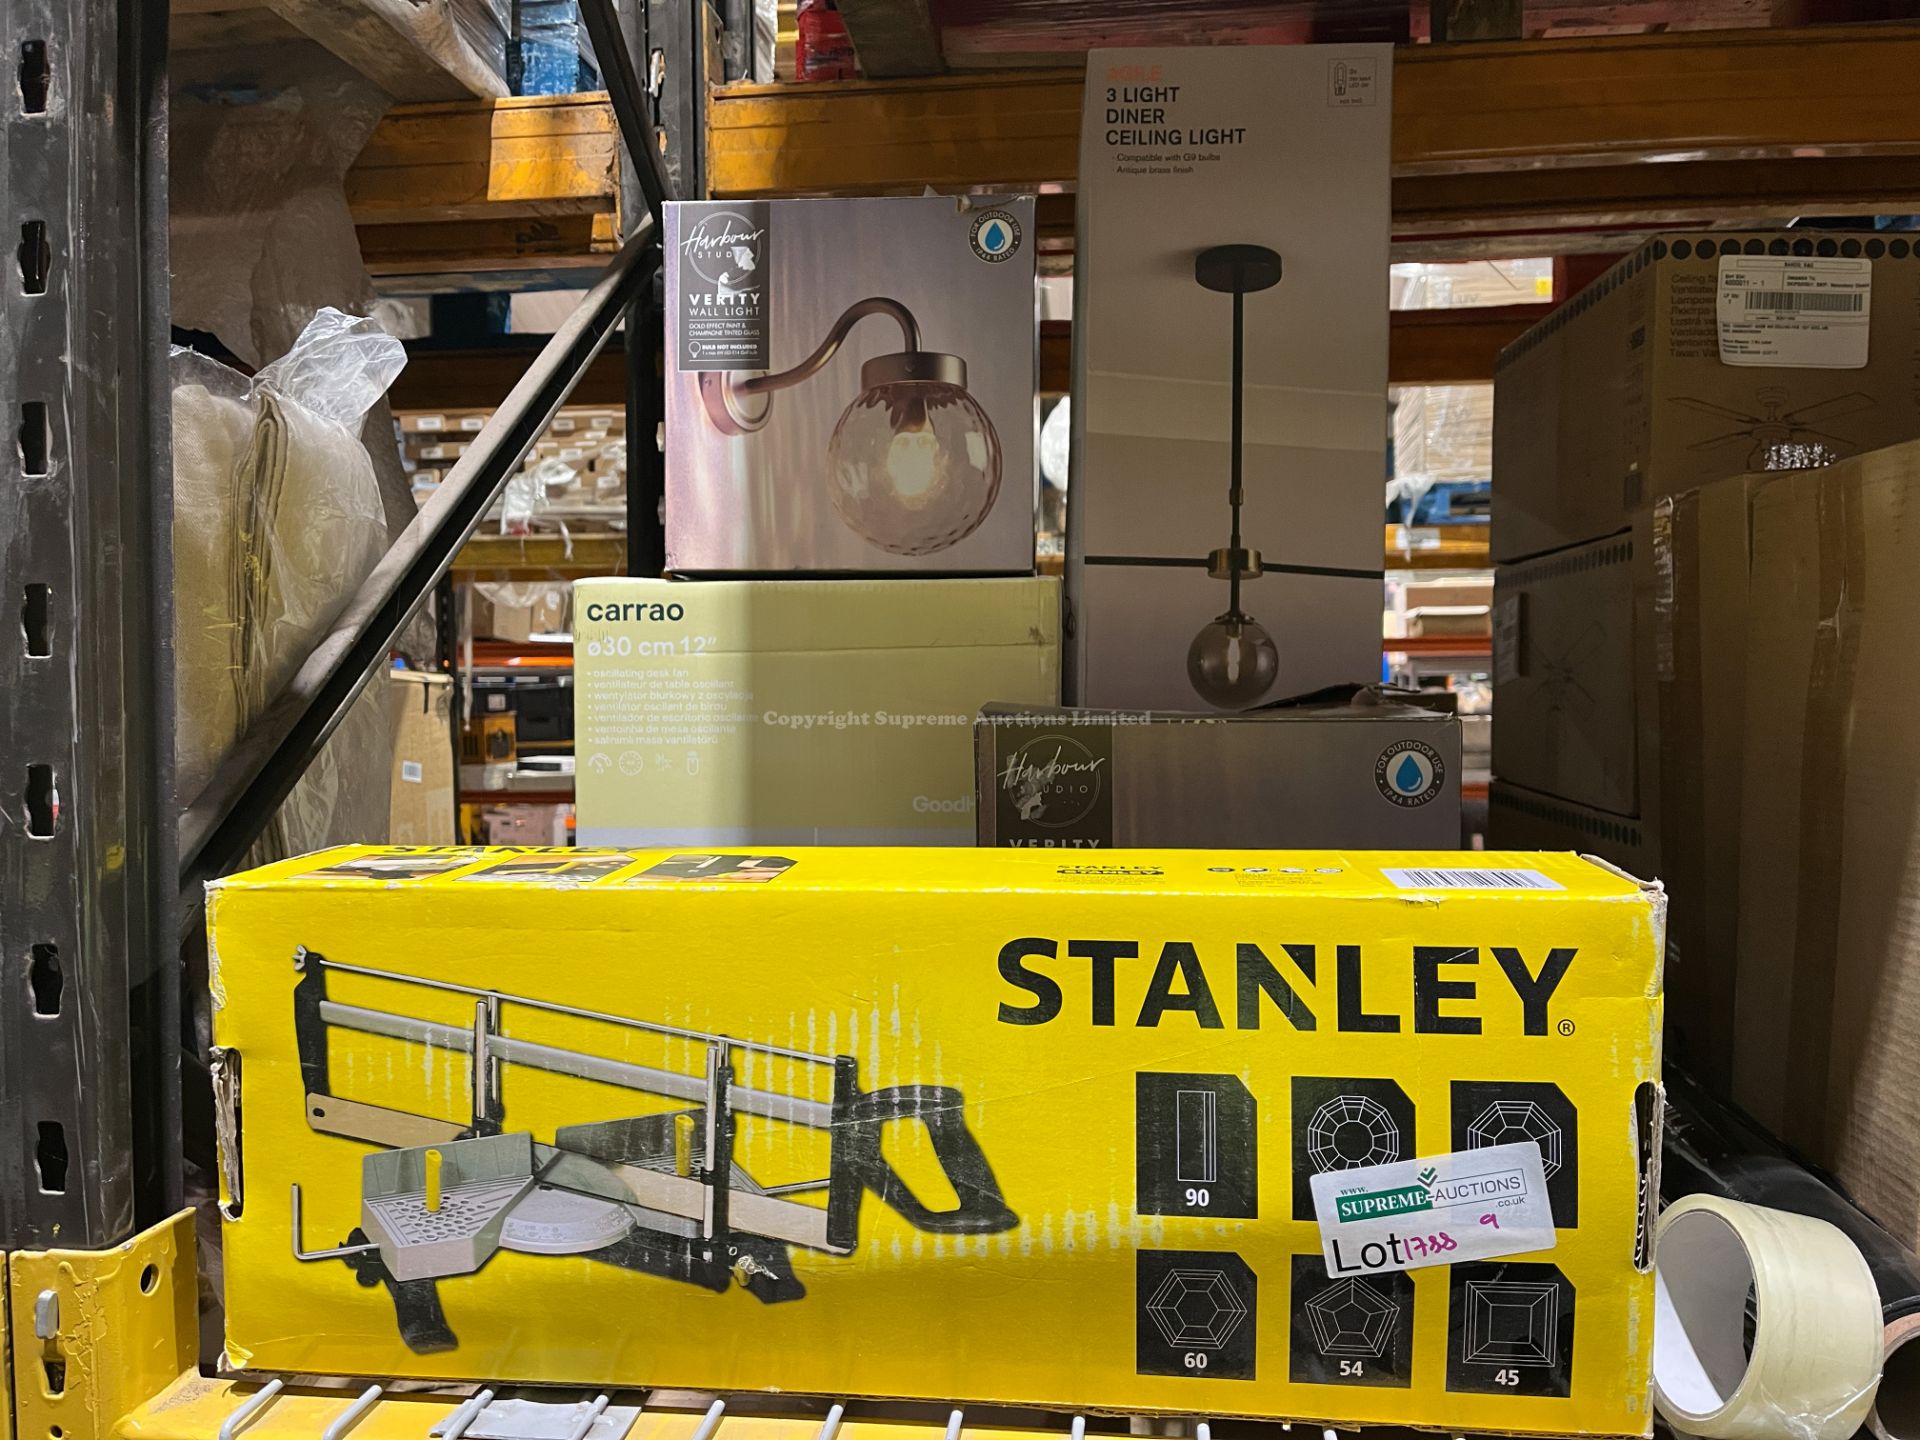 5 PIECE MIXED LOT INCLUDING STANLEY MITRE BOX AND LIGHTING R3-3